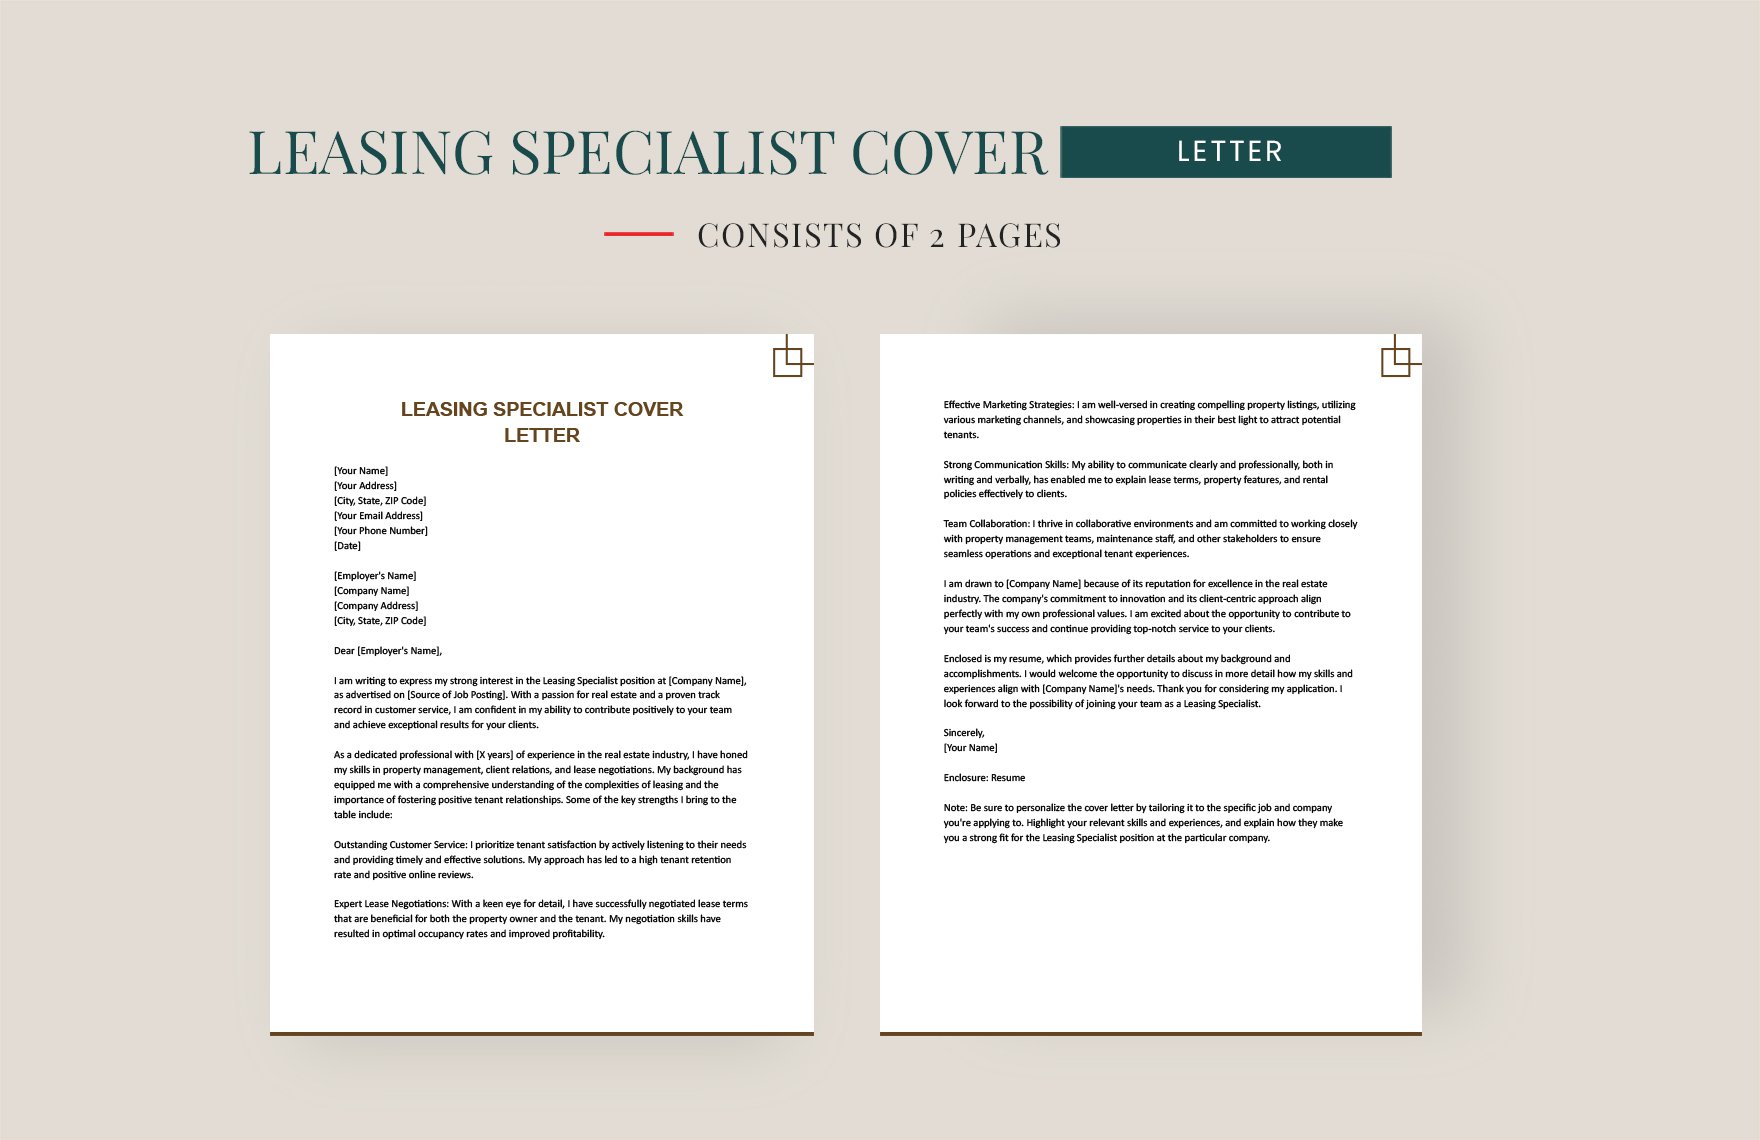 Leasing Specialist Cover Letter